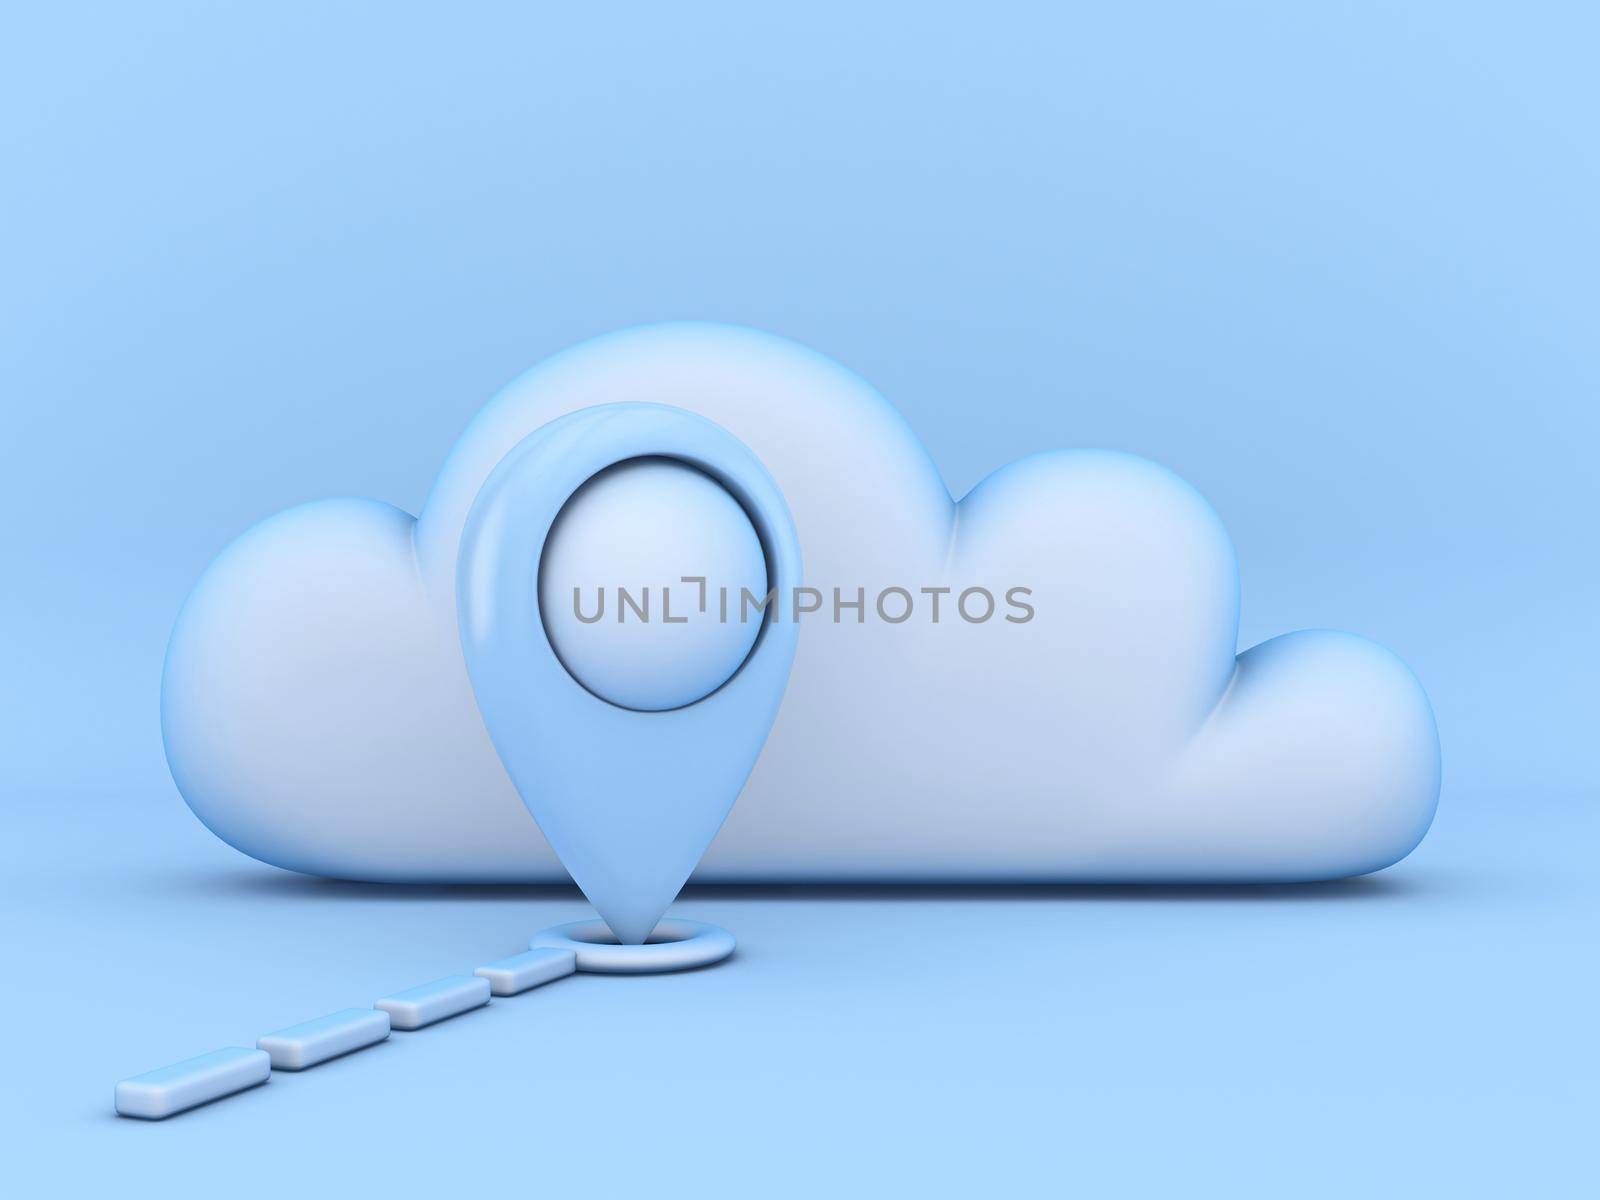 Cloud concept of favorite places 3D rendering illustration isolated on blue background